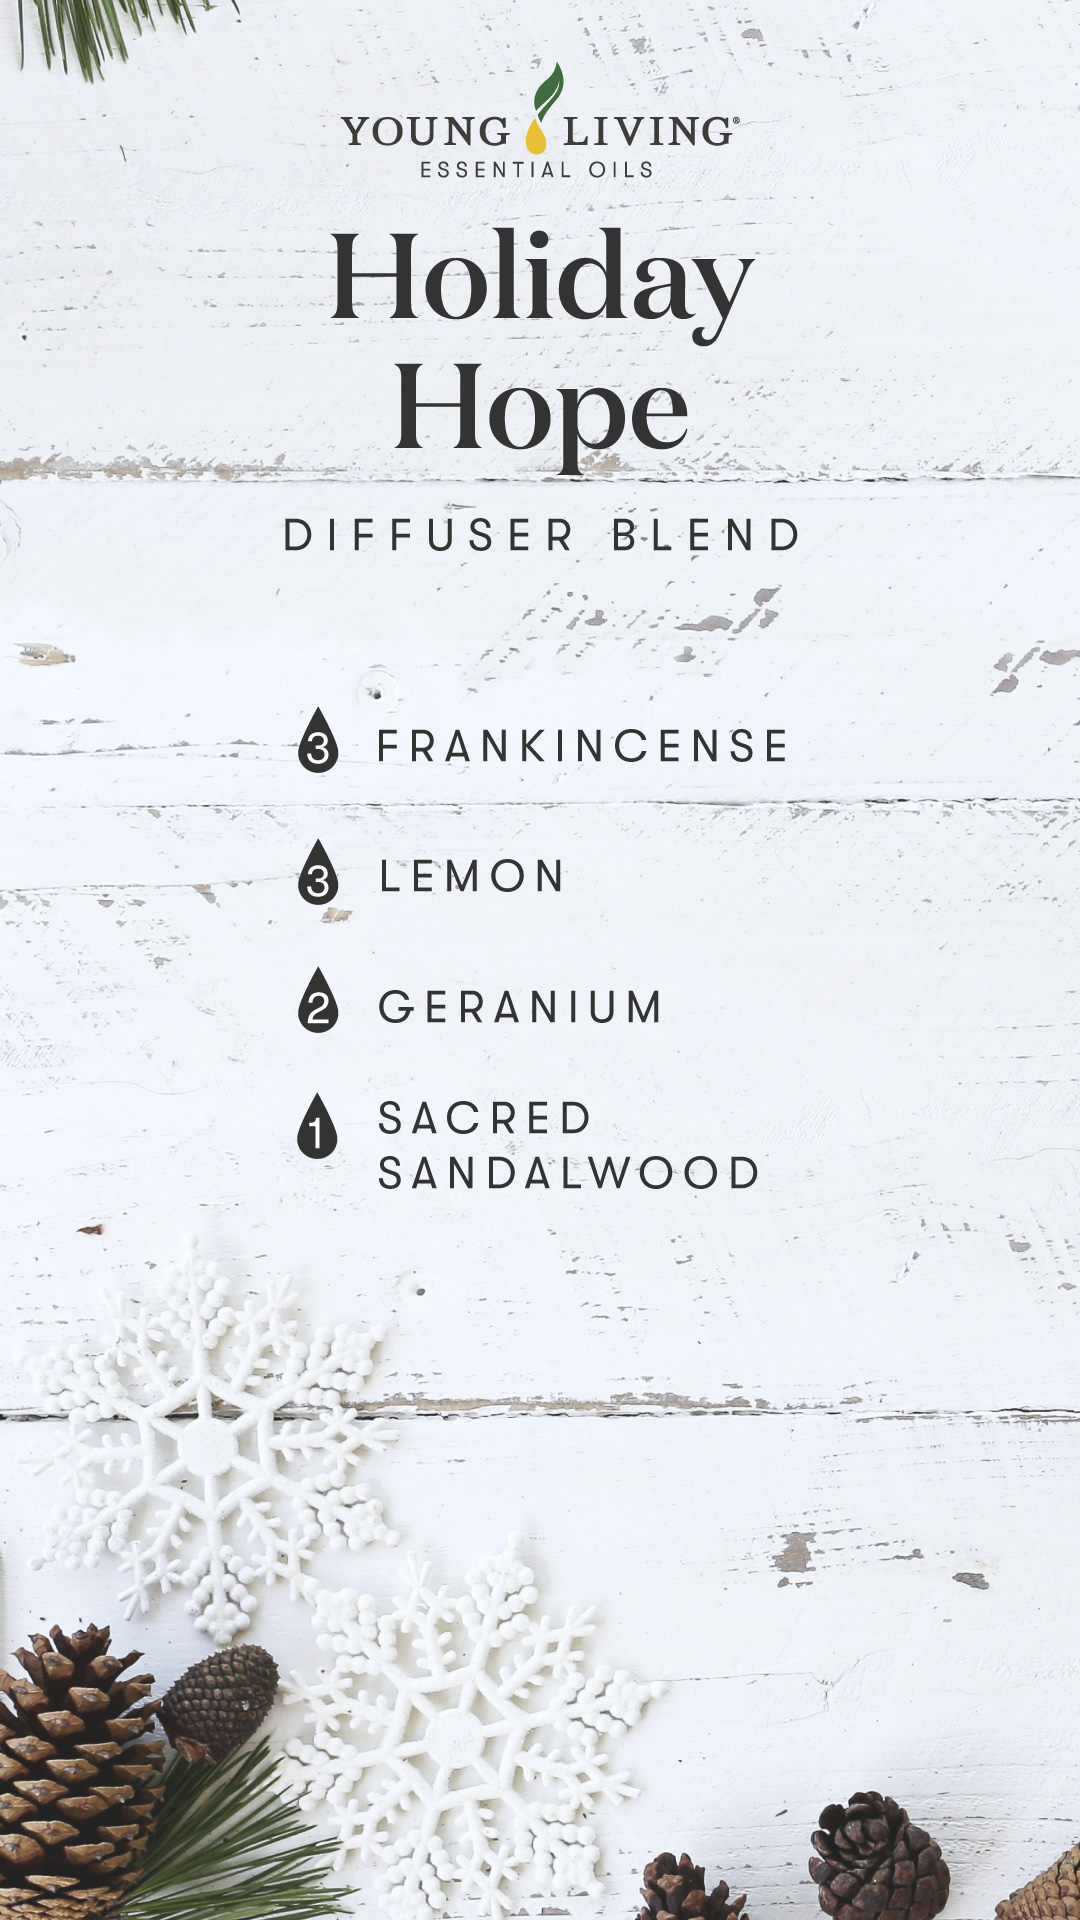 Holiday Hope diffuser blend - Young Living Lavender Life Blog 